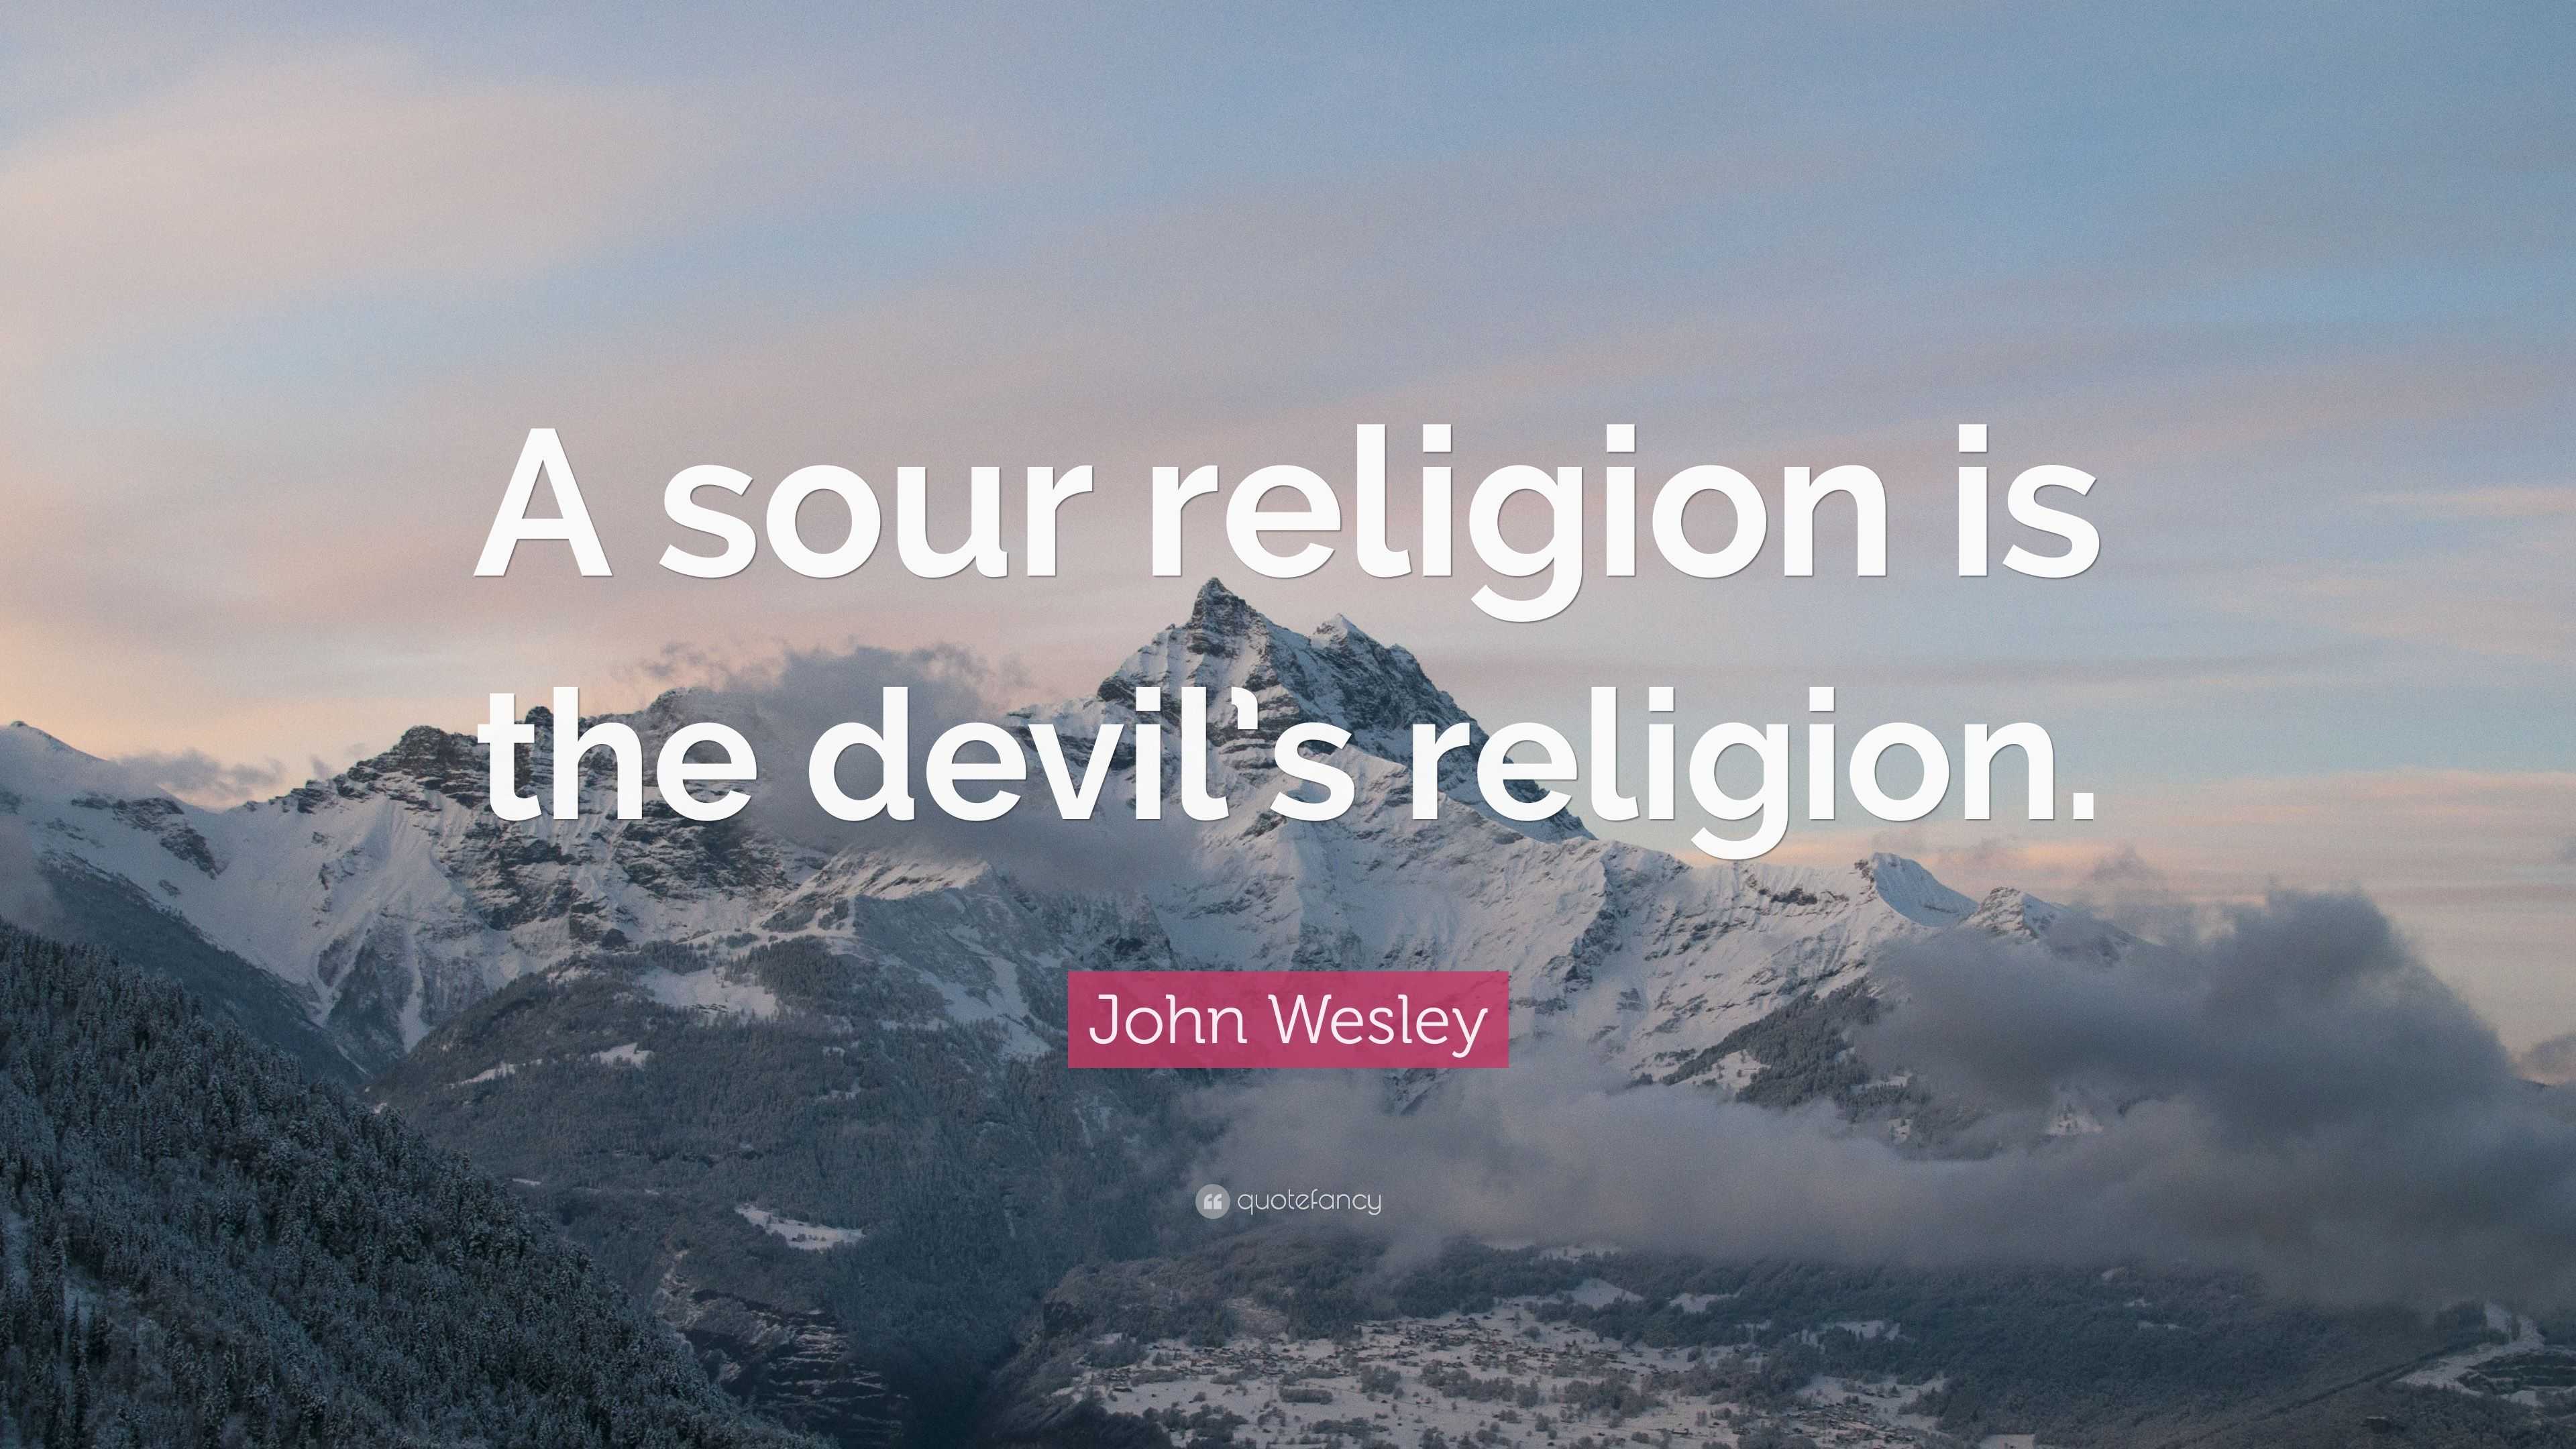 John Wesley Quote: “A sour religion is the devil’s religion.”